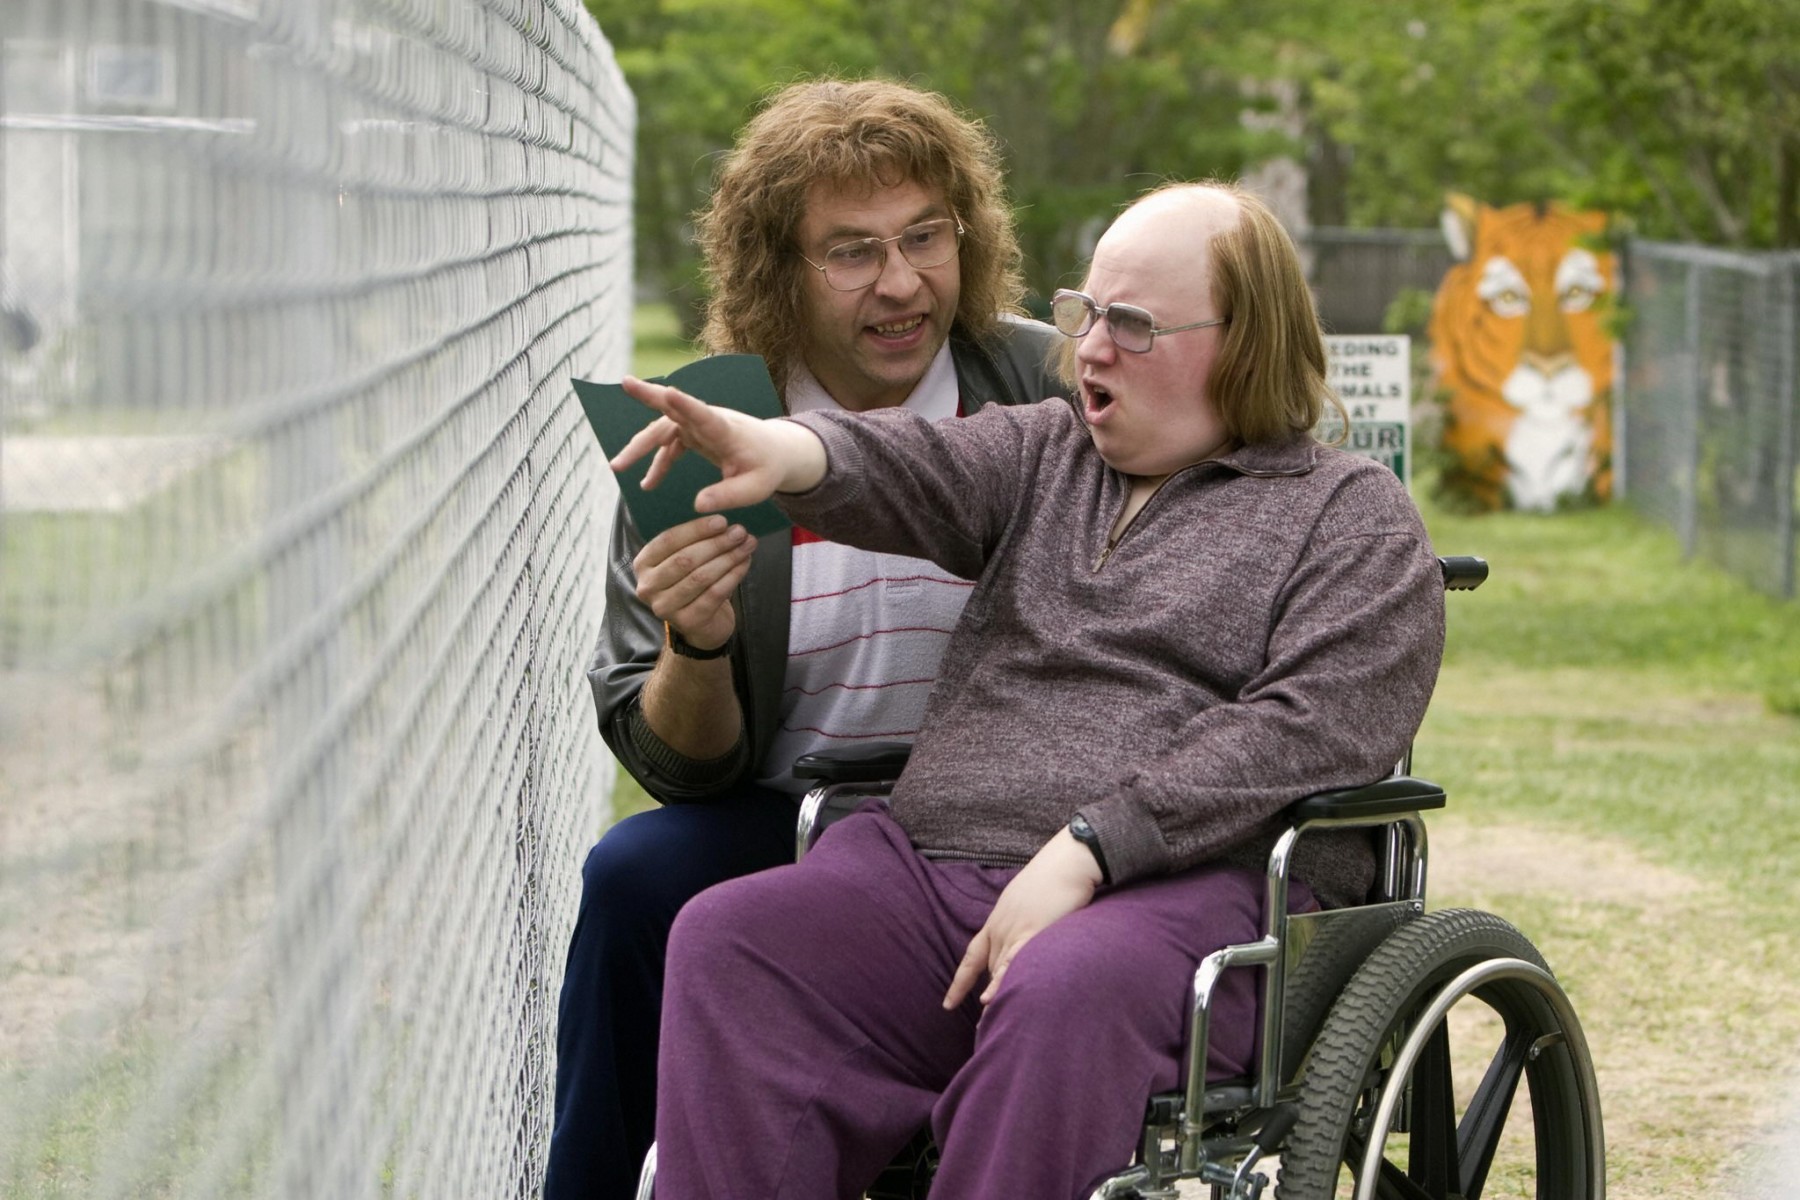 Matt Lucas and David Walliams will bring Little Britain back for the first time in over 10 years